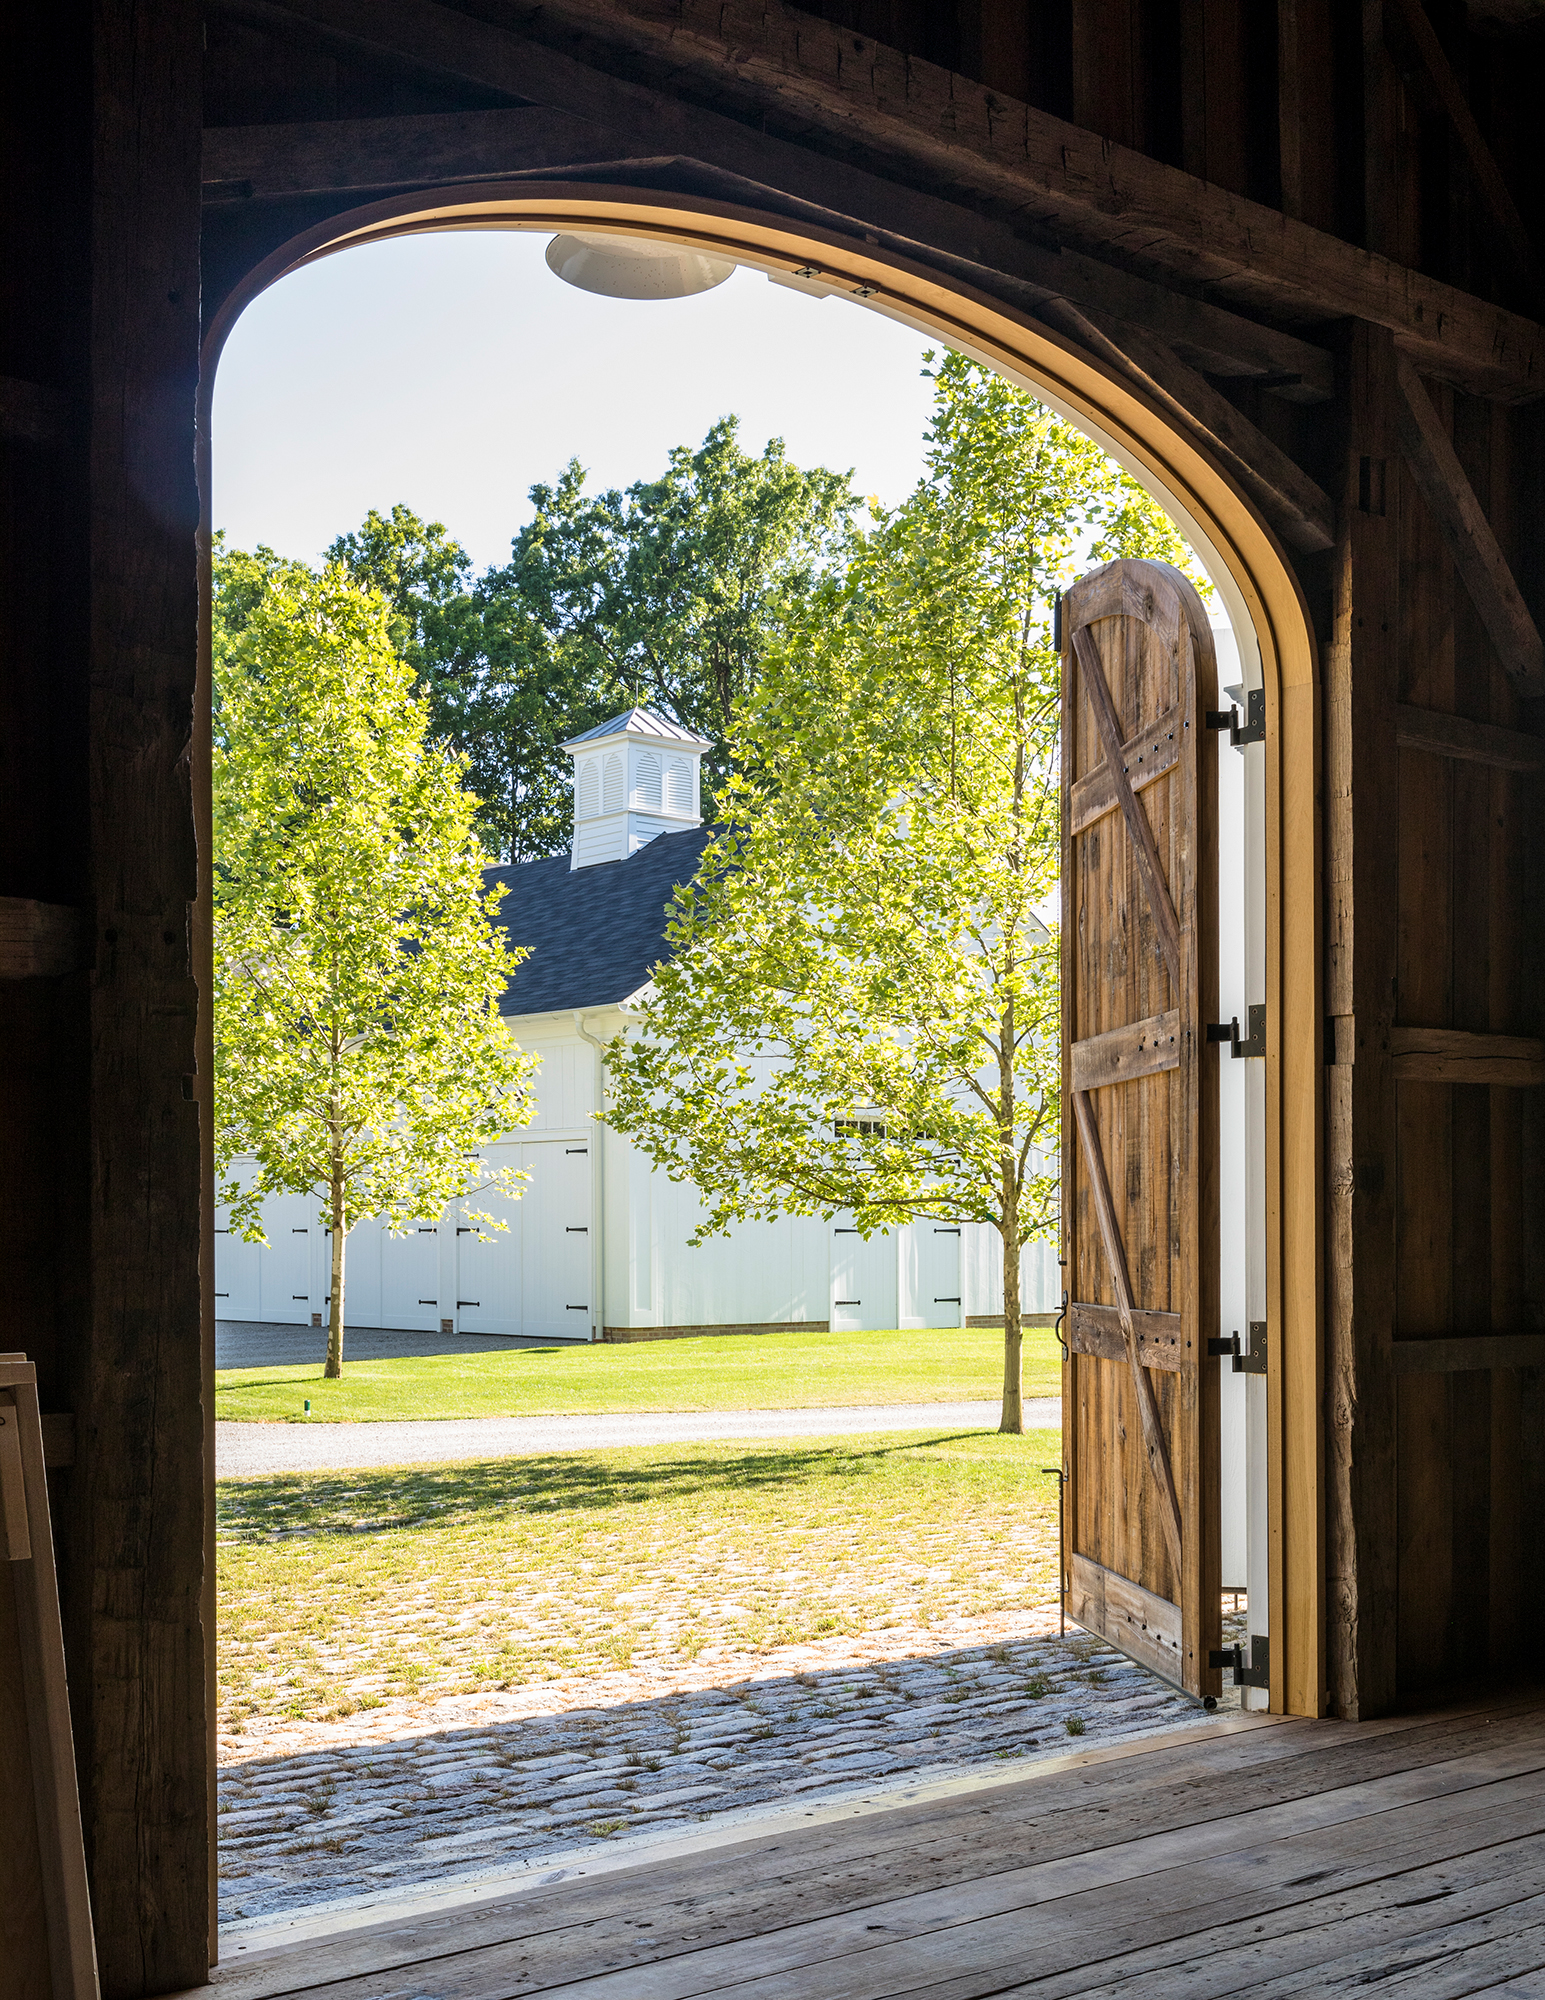 View from within the tractor barn. The paving outside the barn is widely spaced cobblestones planted with grass, providing a durable yet green foreground to the large building.